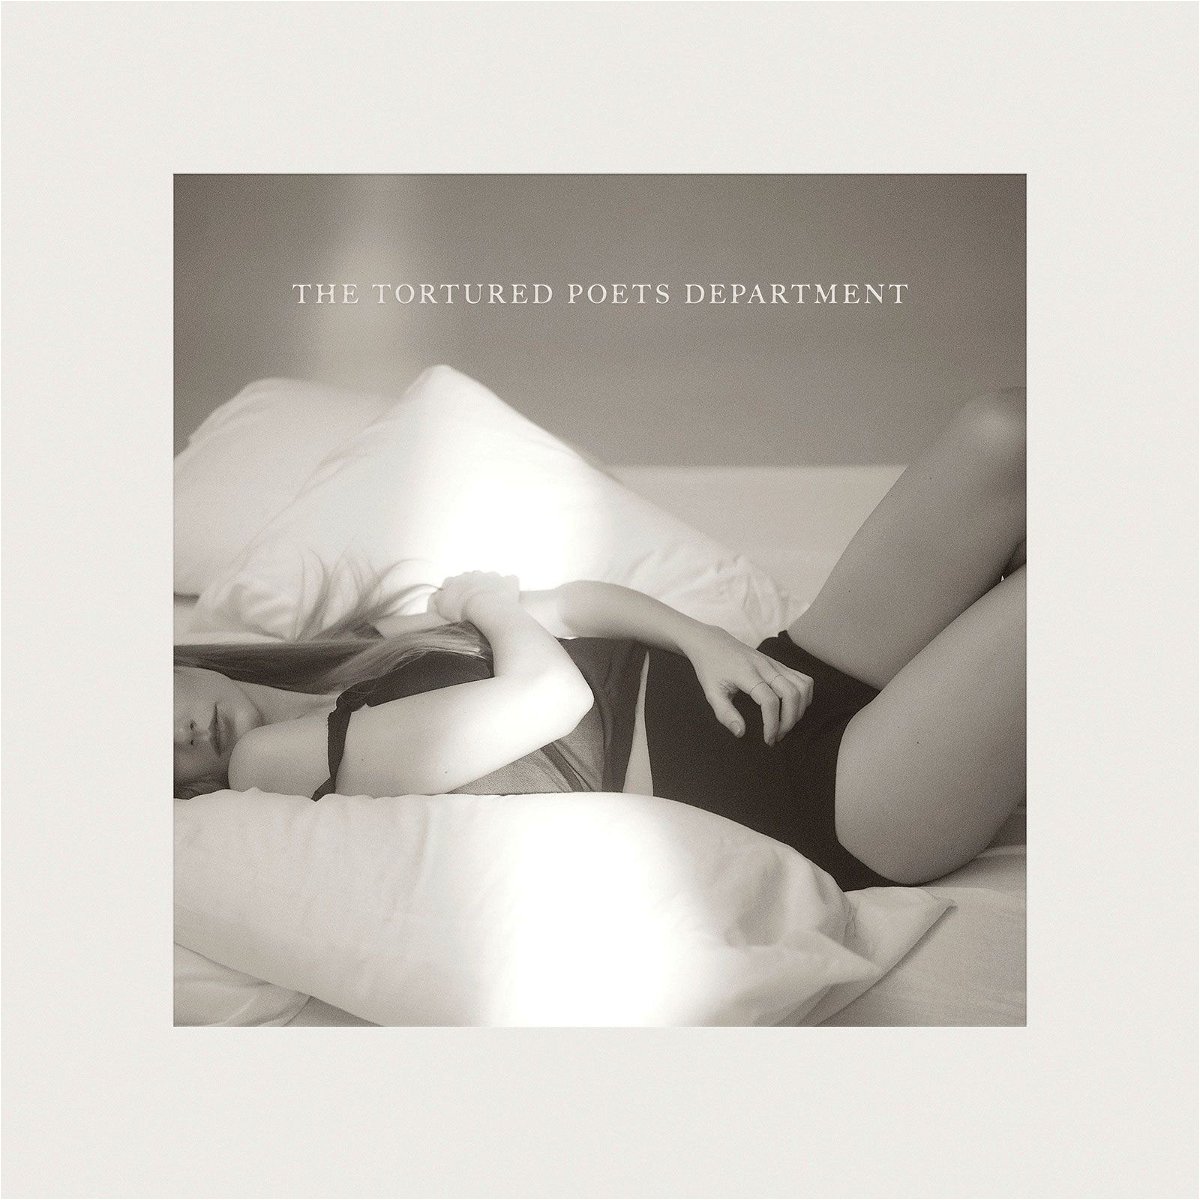 This cover image released by Republic Records show "The Tortured Poets Department" by Taylor Swift.